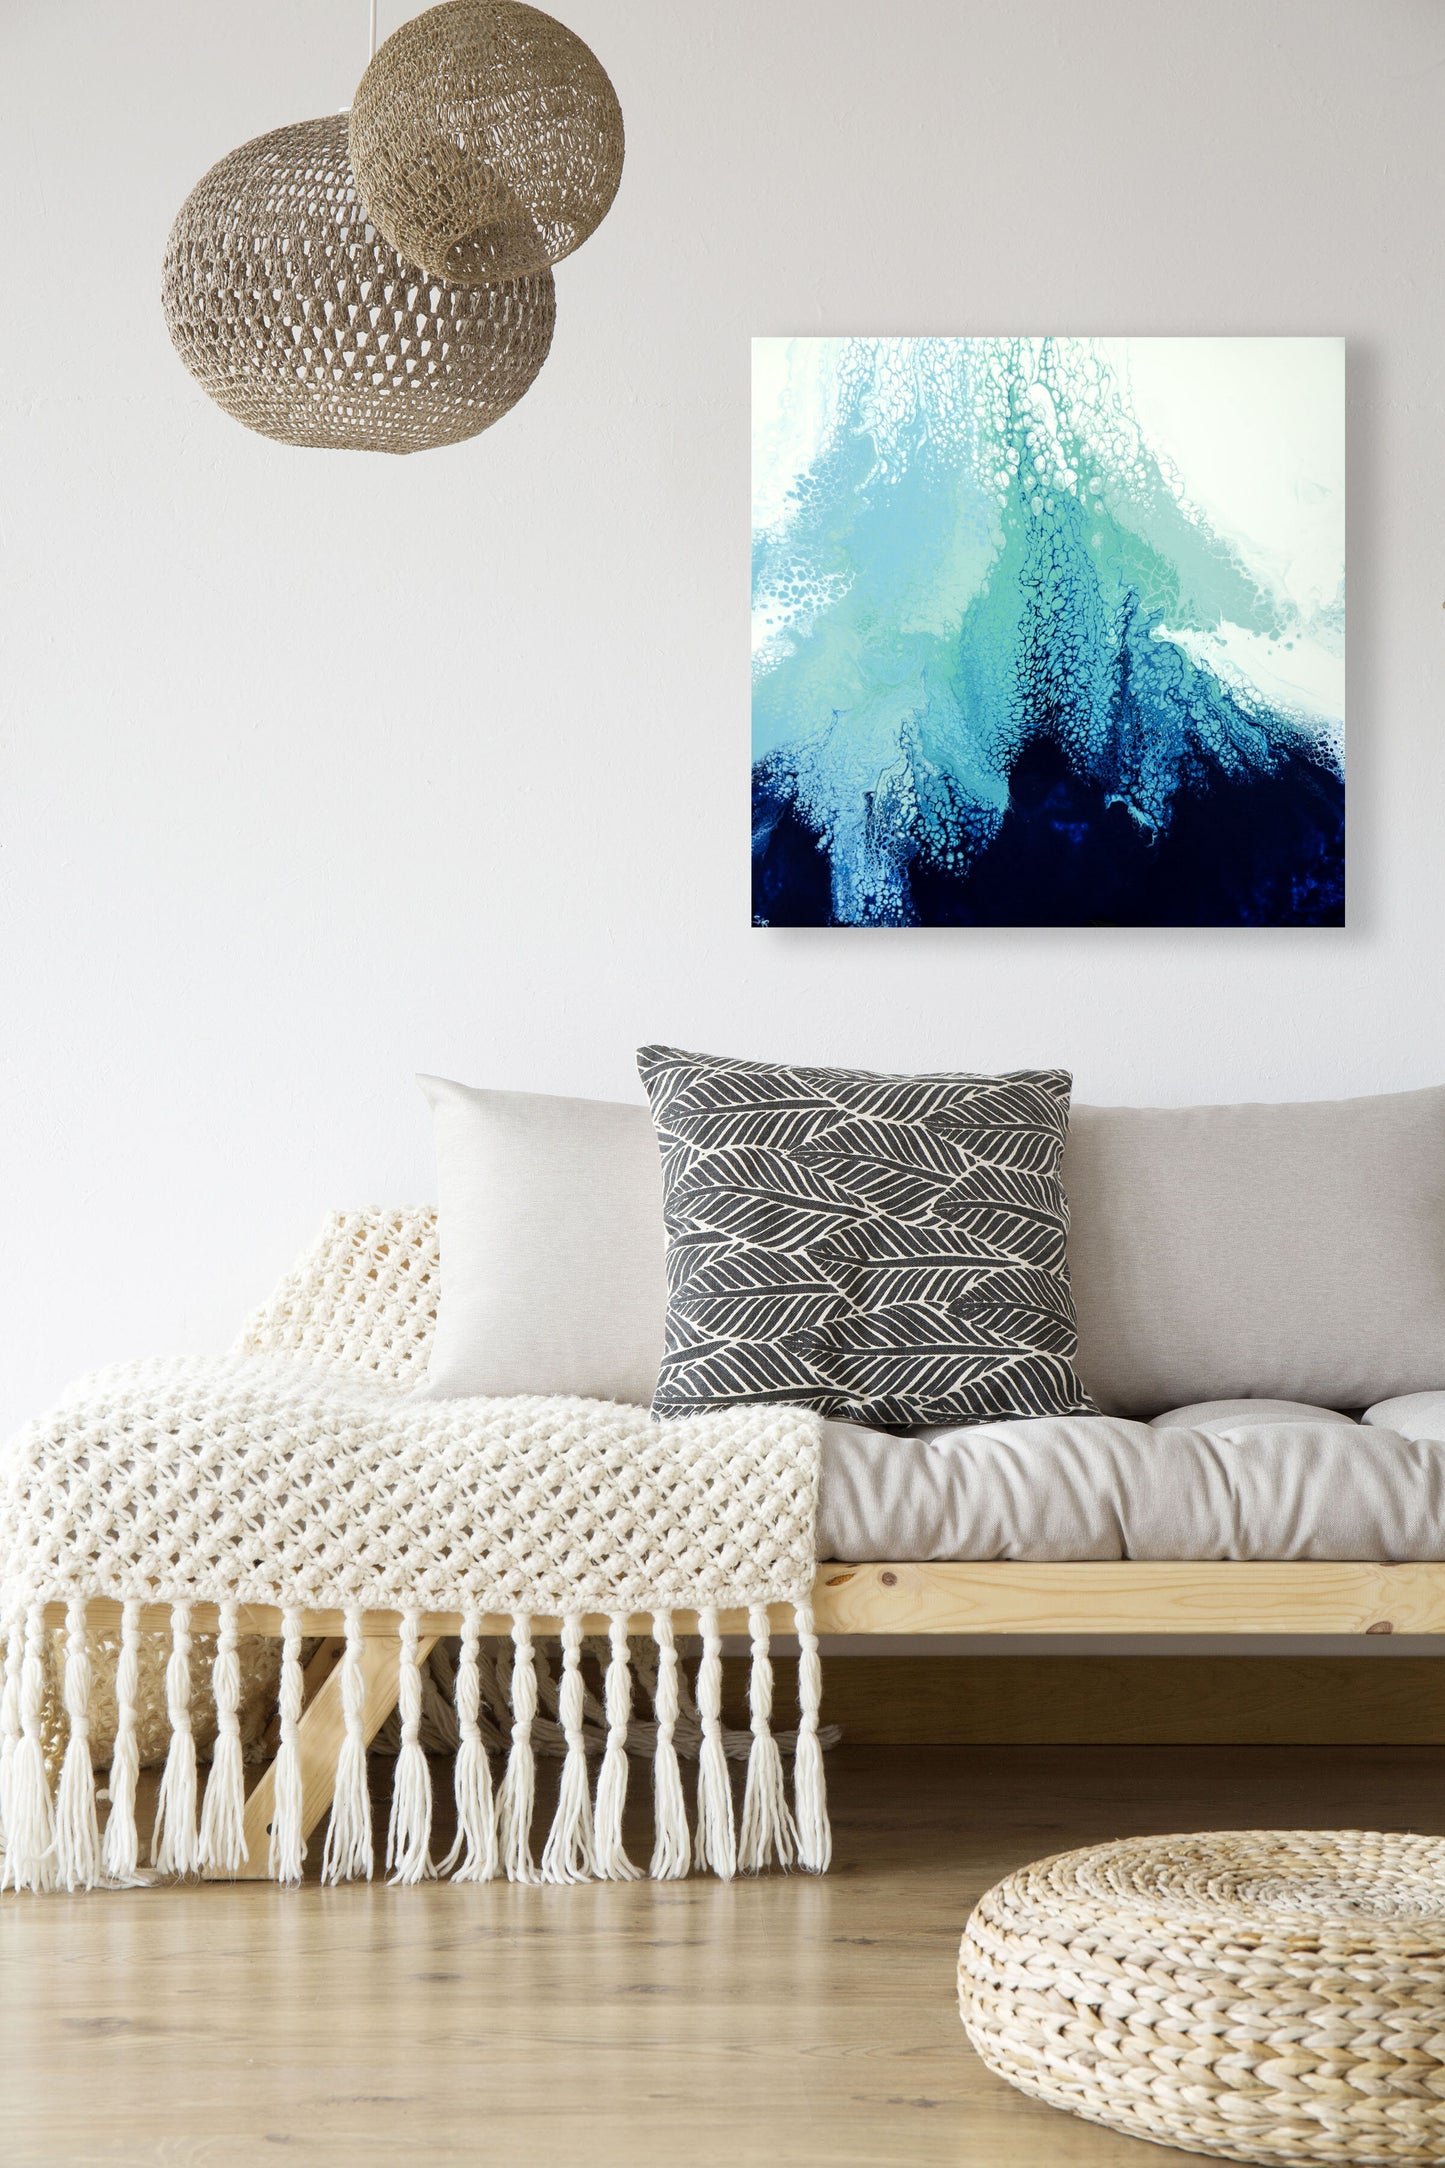 abstract ocean art blue fluid painting hanging in modern interior 